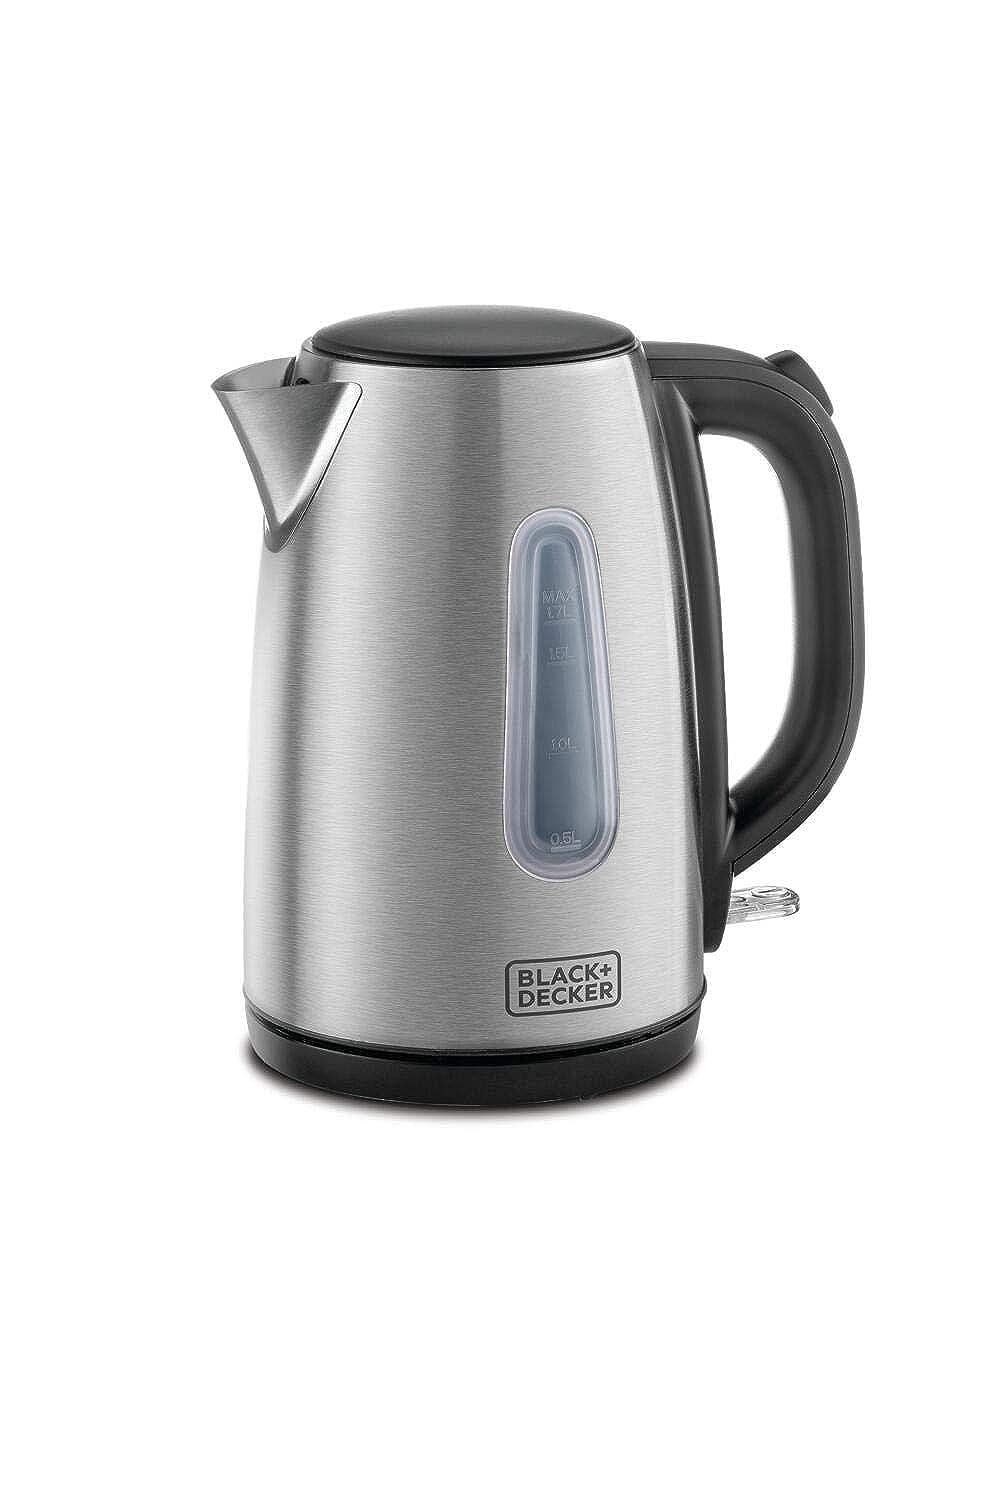 BLACK+DECKER Cordless Electric Kettle, 2200W Power, 1.7L, with Water-Level Indicator, Removable Filter & Auto Shut-Off, Stainless Steel Body, Perfect